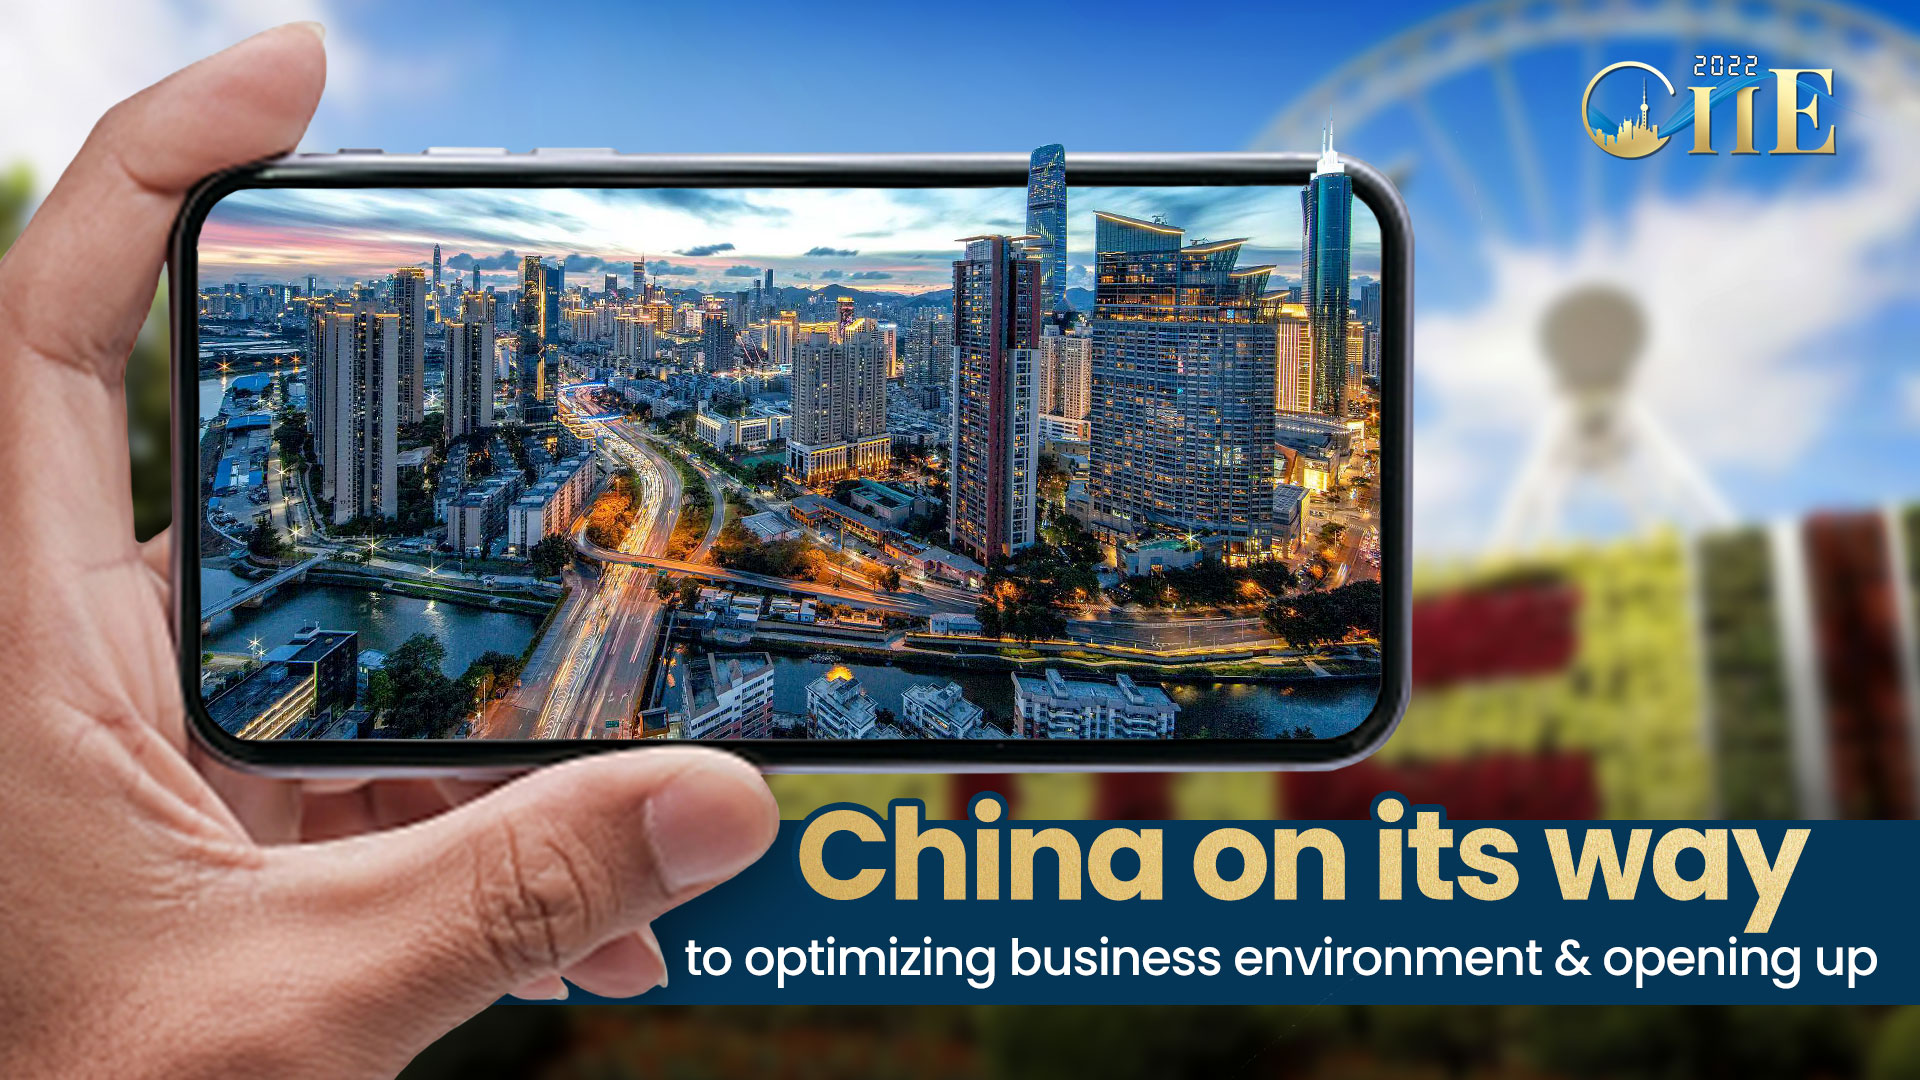 How China is optimizing its business environment and opening up